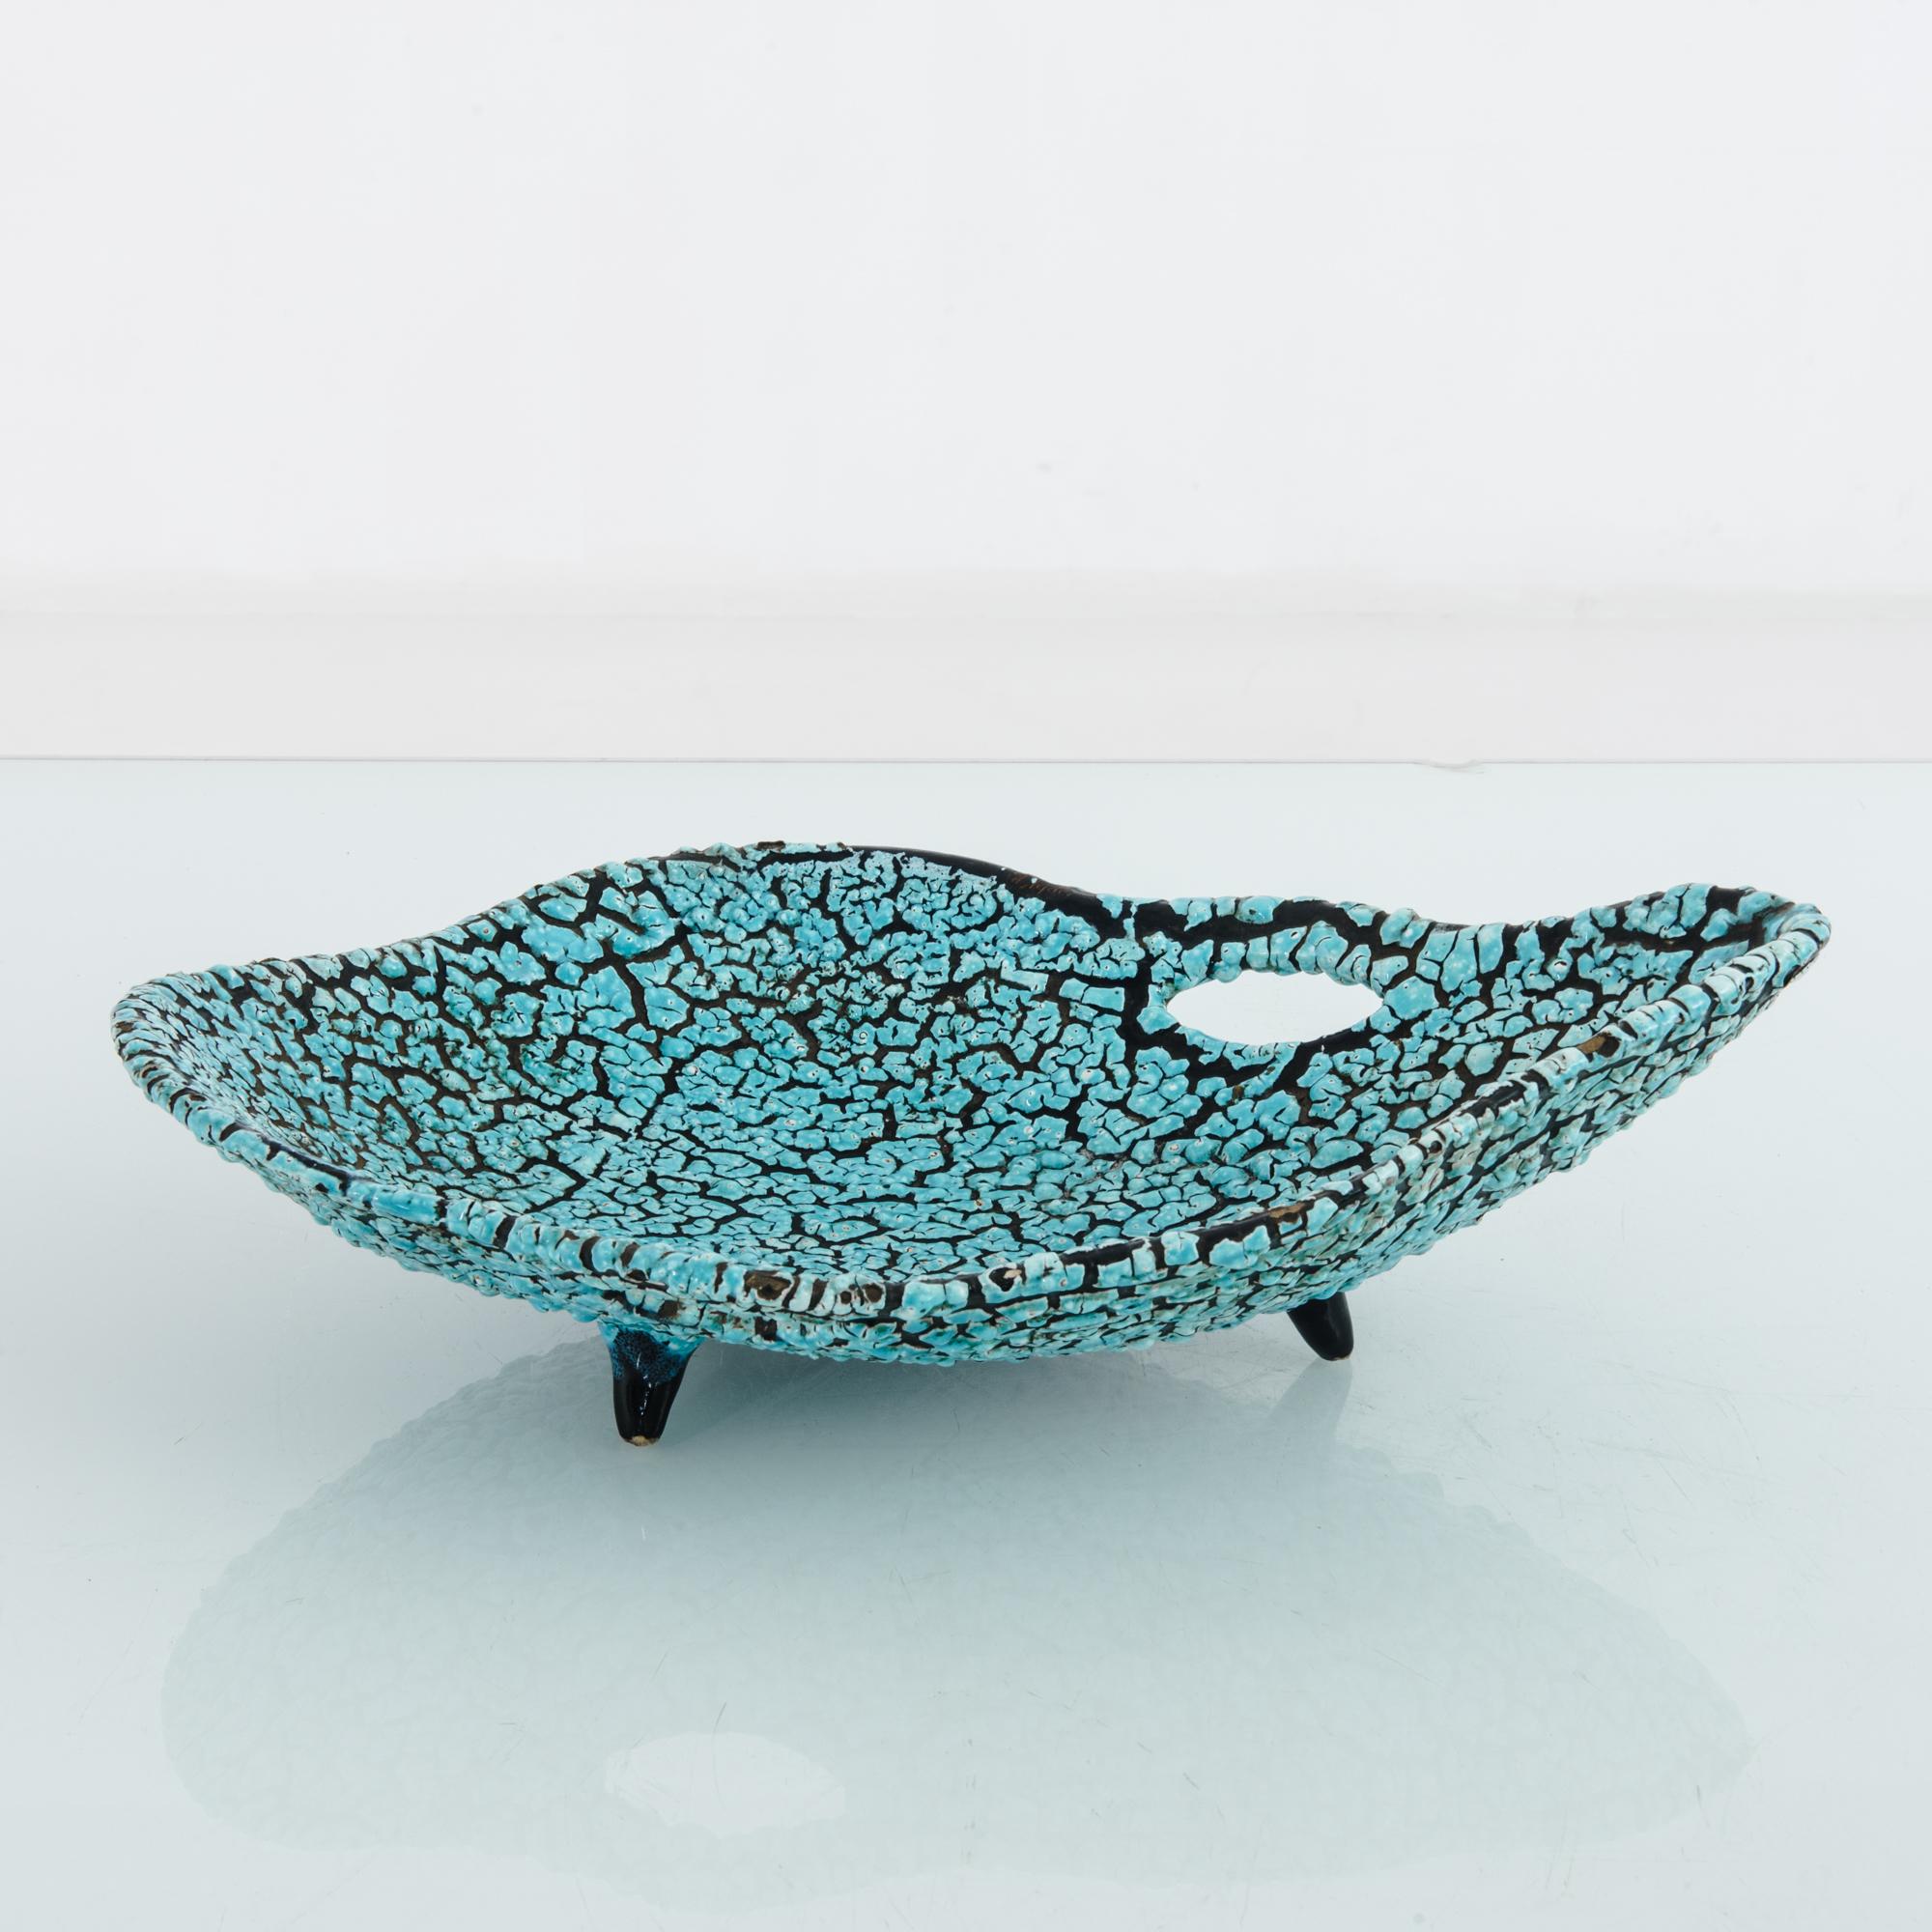 Made in France, circa 1960, this ceramic tray features a turquoise mosaic against a sea of black. Slightly elevated on feet, the tray displays a rounded form, which is curved along the edges. An eye-shaped opening adds a touch of intrigue to this